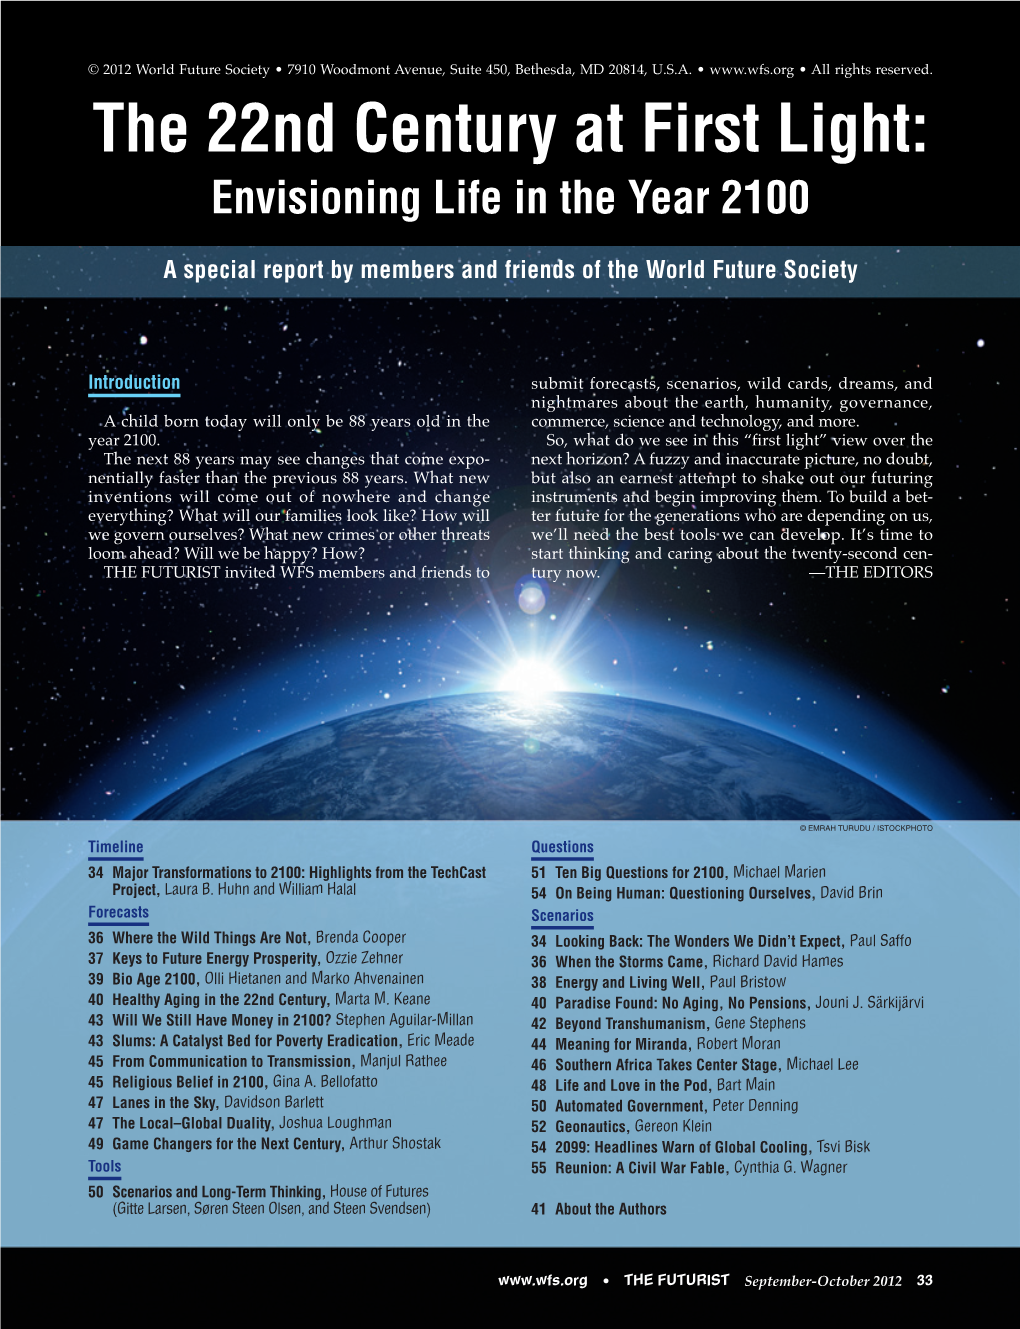 The 22Nd Century at First Light: Envisioning Life in the Year 2100